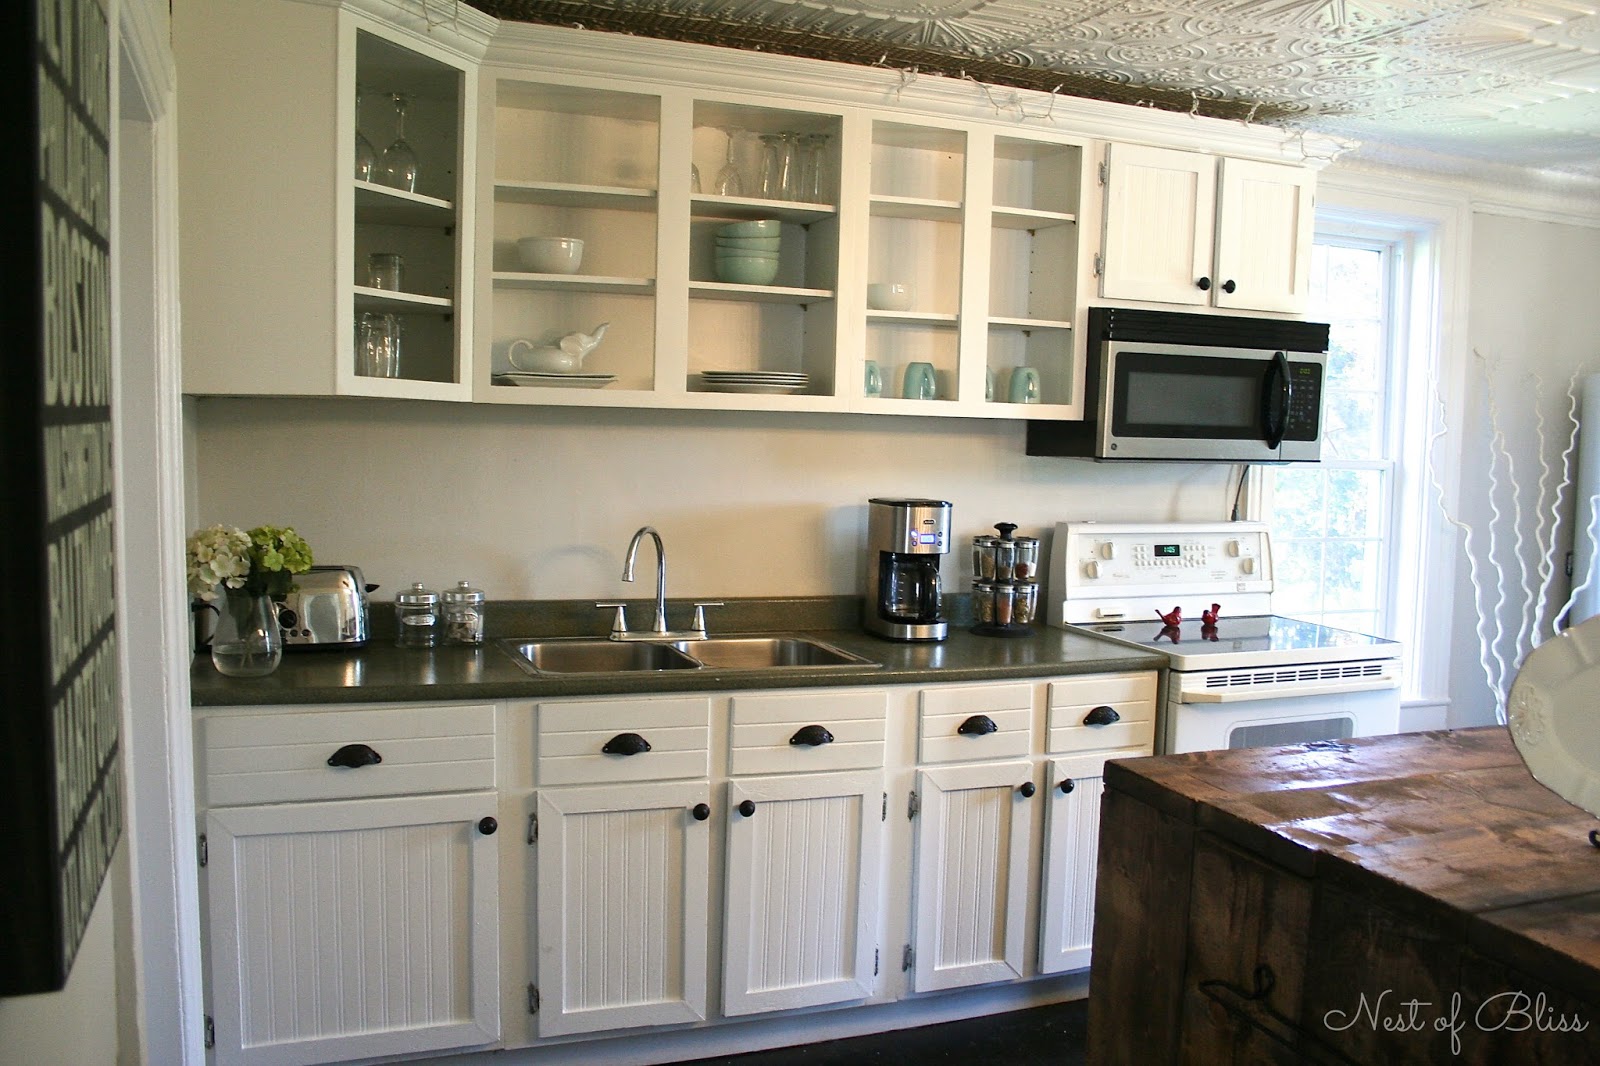 Kitchen Renovation Makeover Progress! Before and After - Nest of Bliss